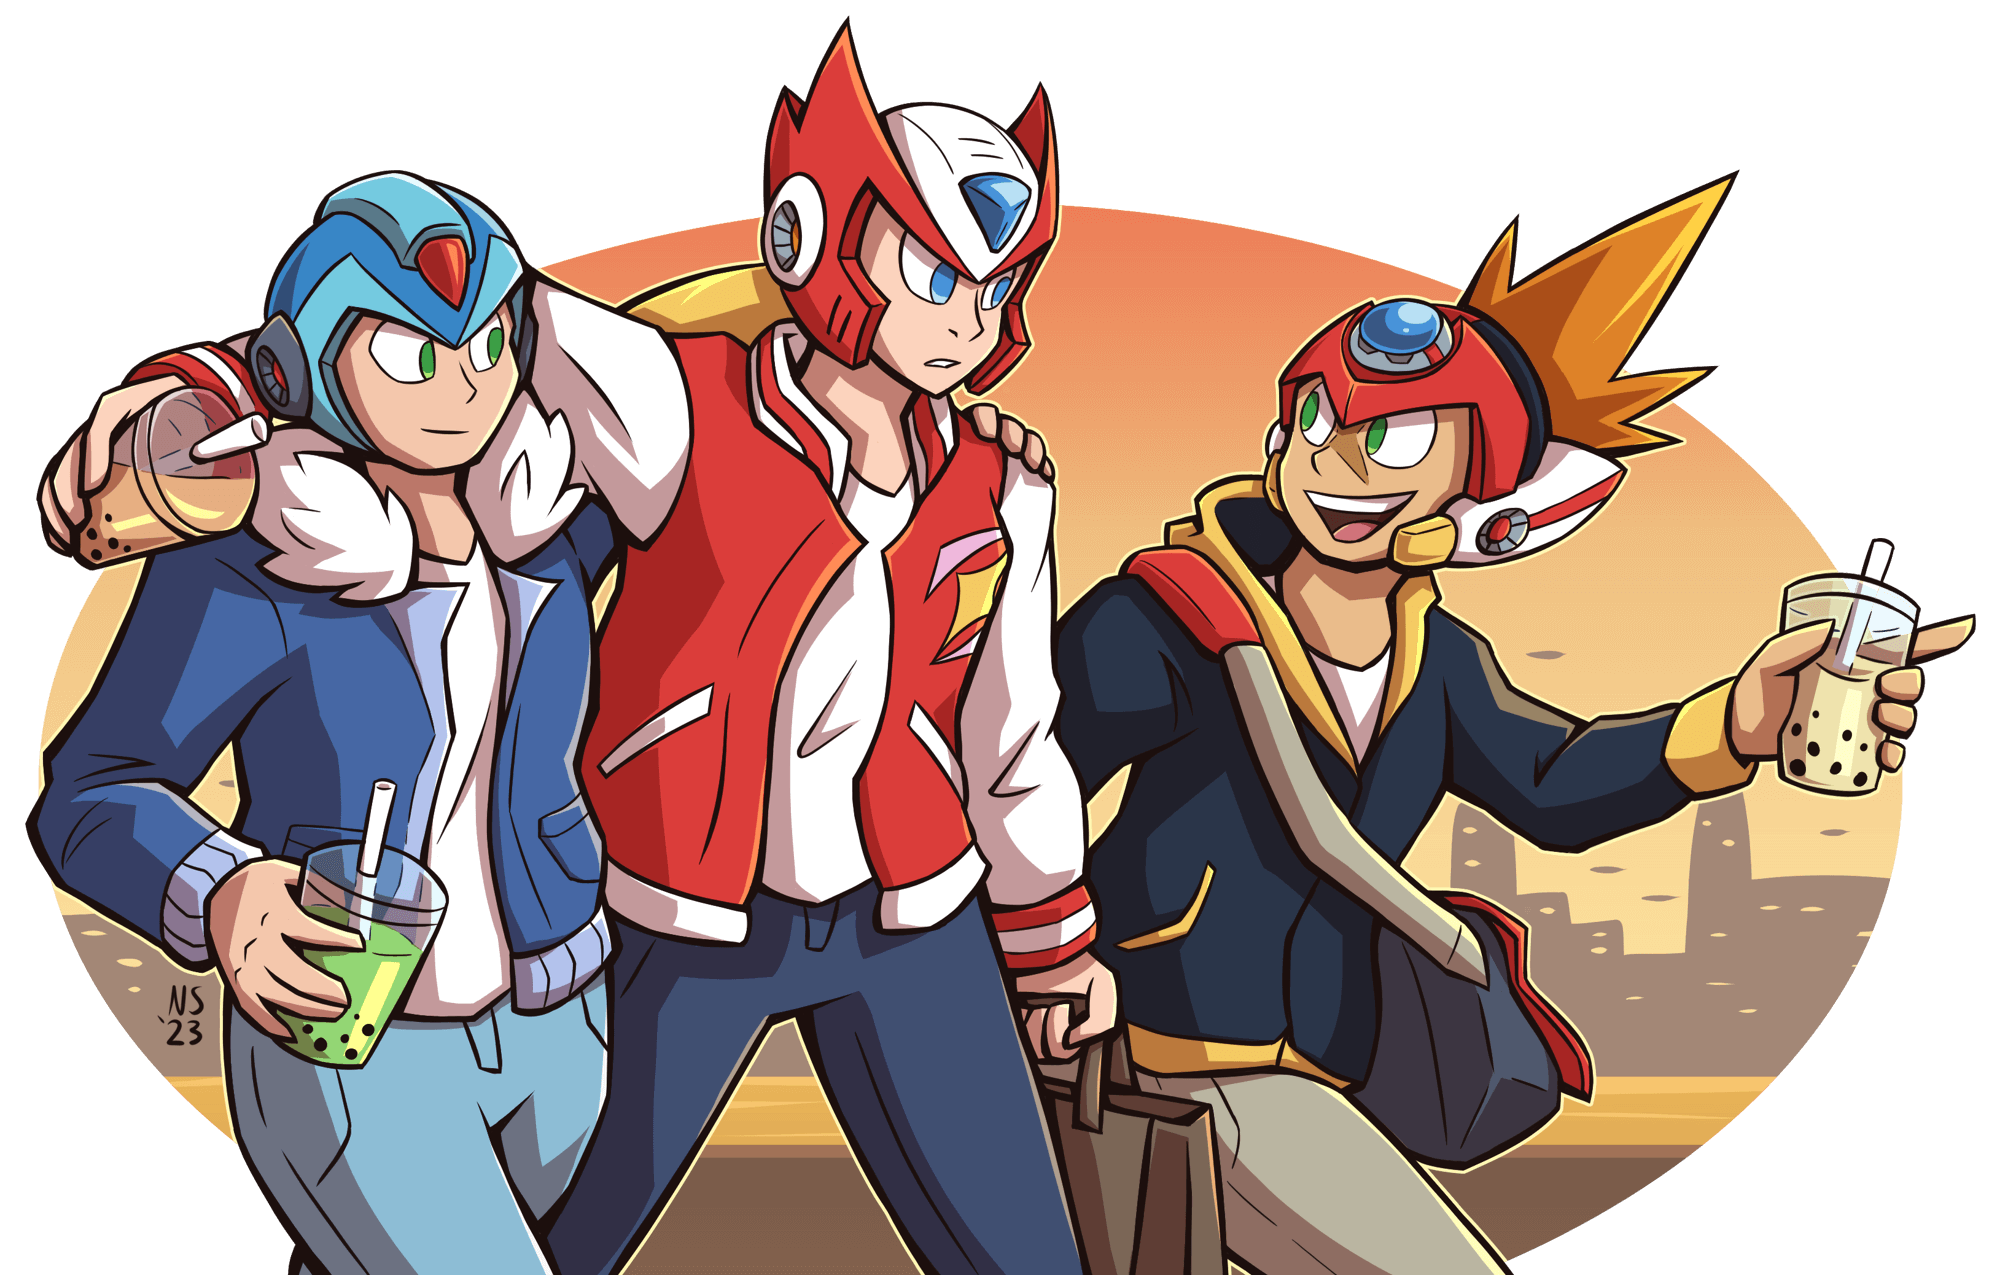 x, zero, and axl from megaman x in casual clothes hanging out in the city